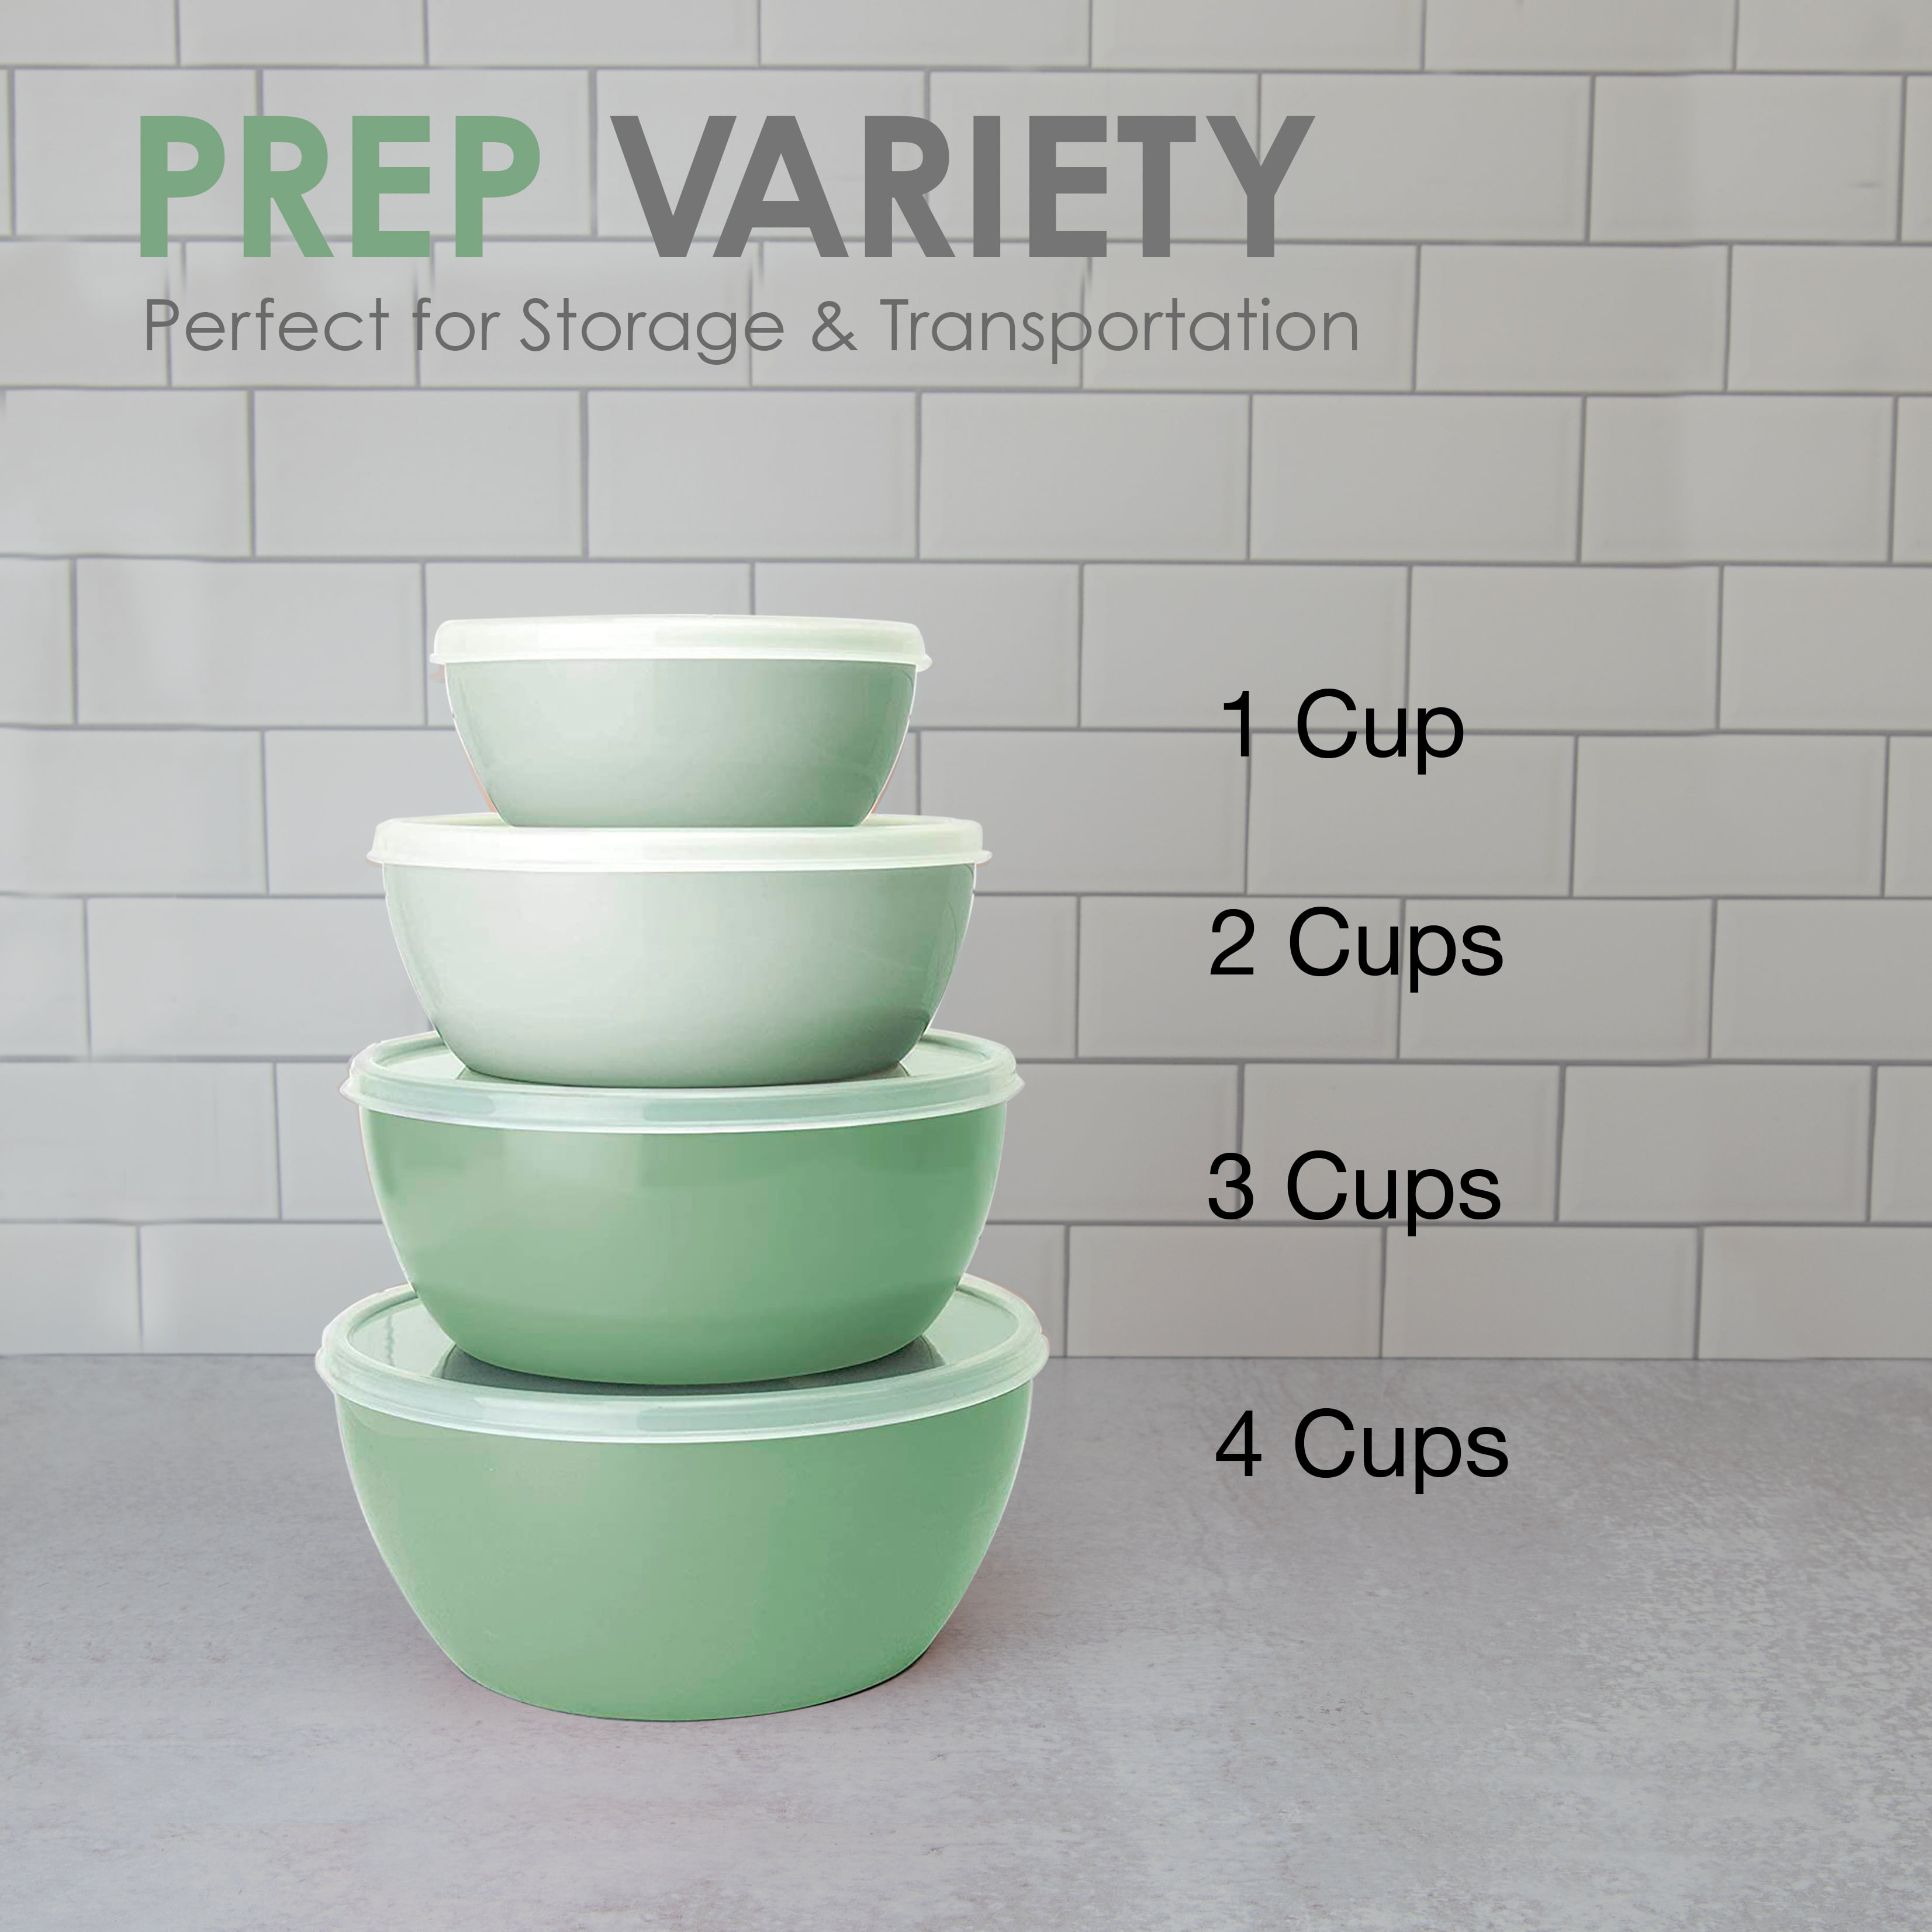 S'well 8 oz. Glass Prep Bowl (Set of 4) 14208-B20-69800 - The Home Depot